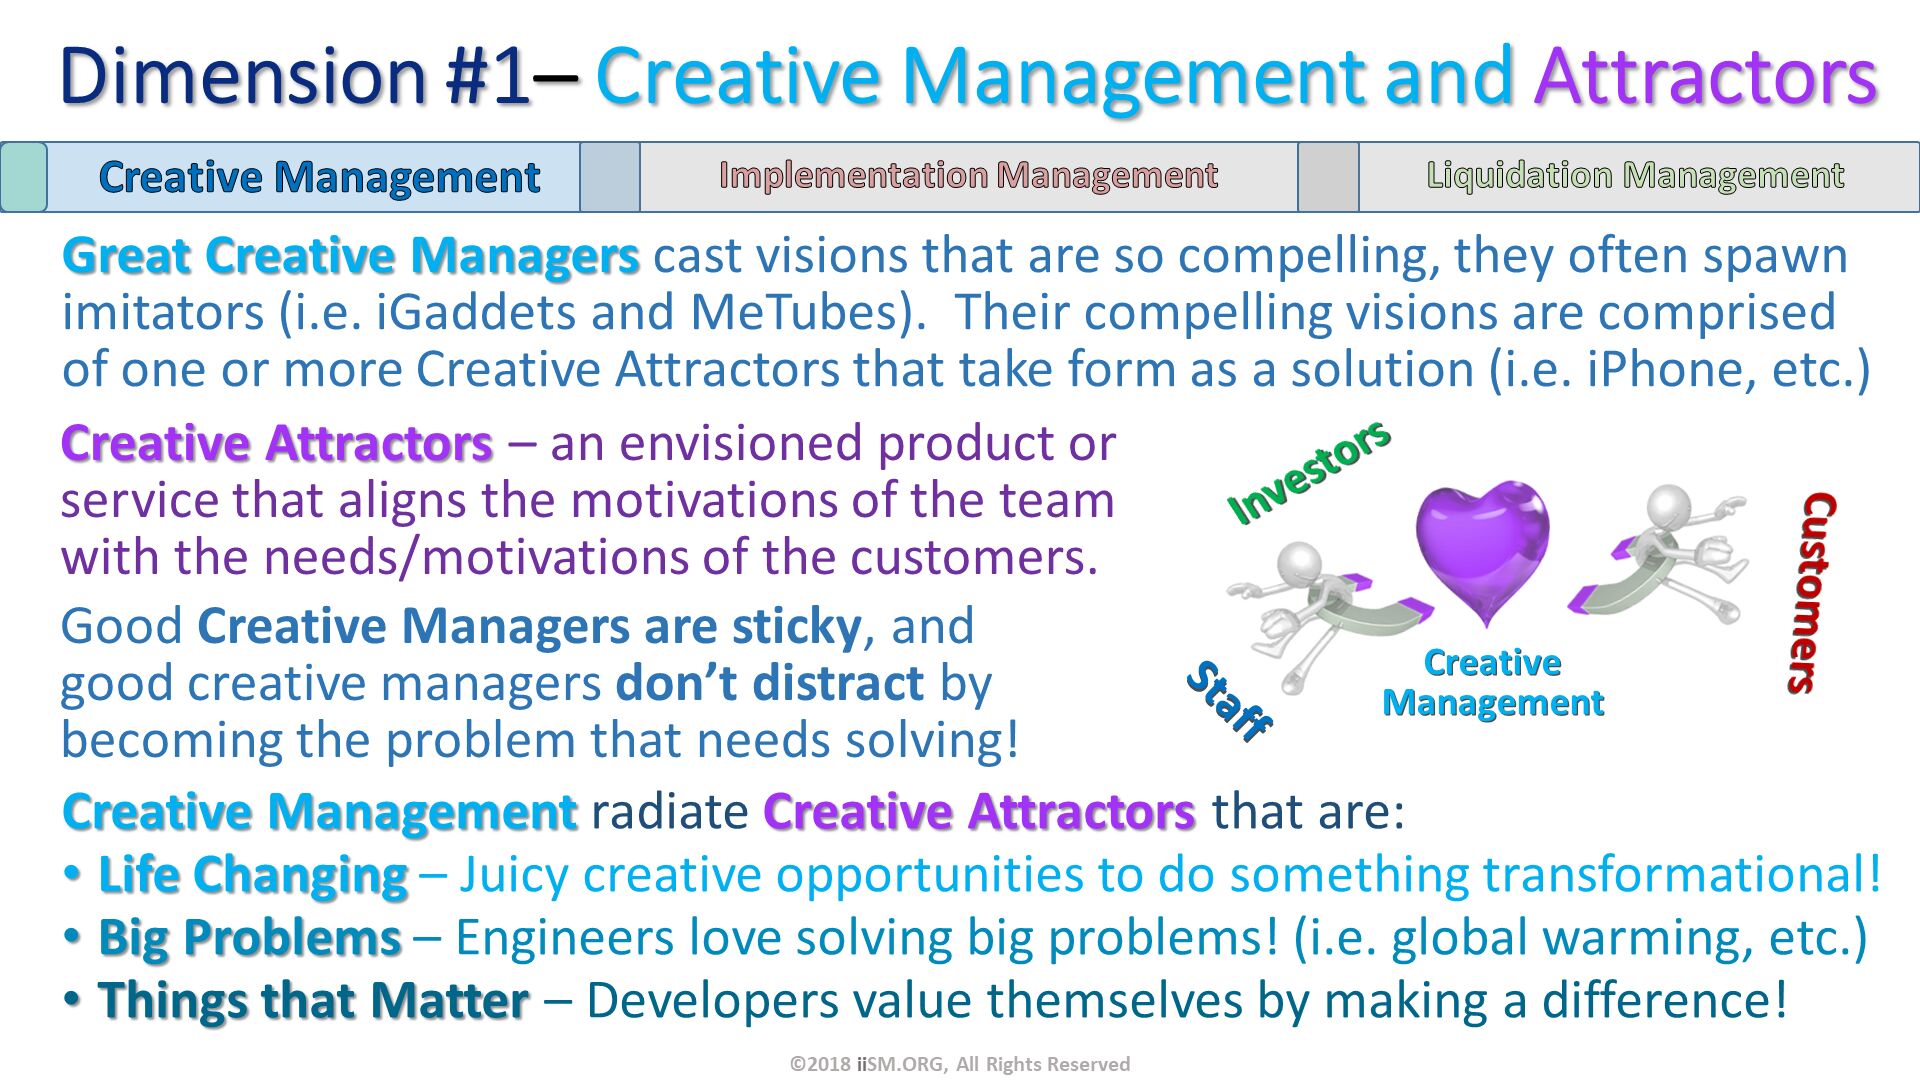 Great Creative Managers cast visions that are so compelling, they often spawn imitators (i.e. iGaddets and MeTubes).  Their compelling visions are comprised of one or more Creative Attractors that take form as a solution (i.e. iPhone, etc.). ©2018 iiSM.ORG, All Rights Reserved. Creative Management radiate Creative Attractors that are:
Life Changing – Juicy creative opportunities to do something transformational!
Big Problems – Engineers love solving big problems! (i.e. global warming, etc.)
Things that Matter – Developers value themselves by making a difference! . Creative Attractors – an envisioned product or service that aligns the motivations of the team with the needs/motivations of the customers.
Good Creative Managers are sticky, and good creative managers don’t distract by becoming the problem that needs solving!. CreativeManagement. Dimension #1– Creative Management and Attractors. 